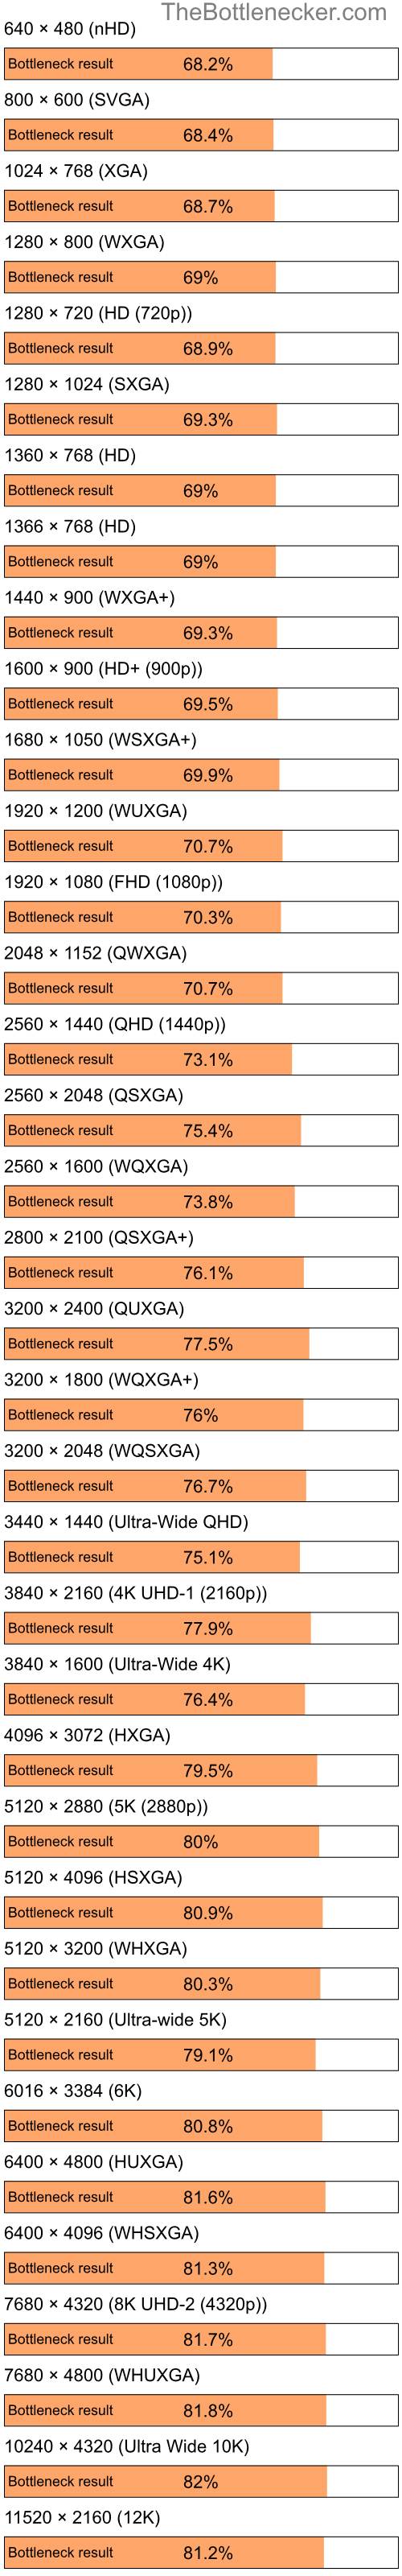 Bottleneck results by resolution for Intel Pentium 4 and AMD Radeon 9550 in Processor Intense Tasks